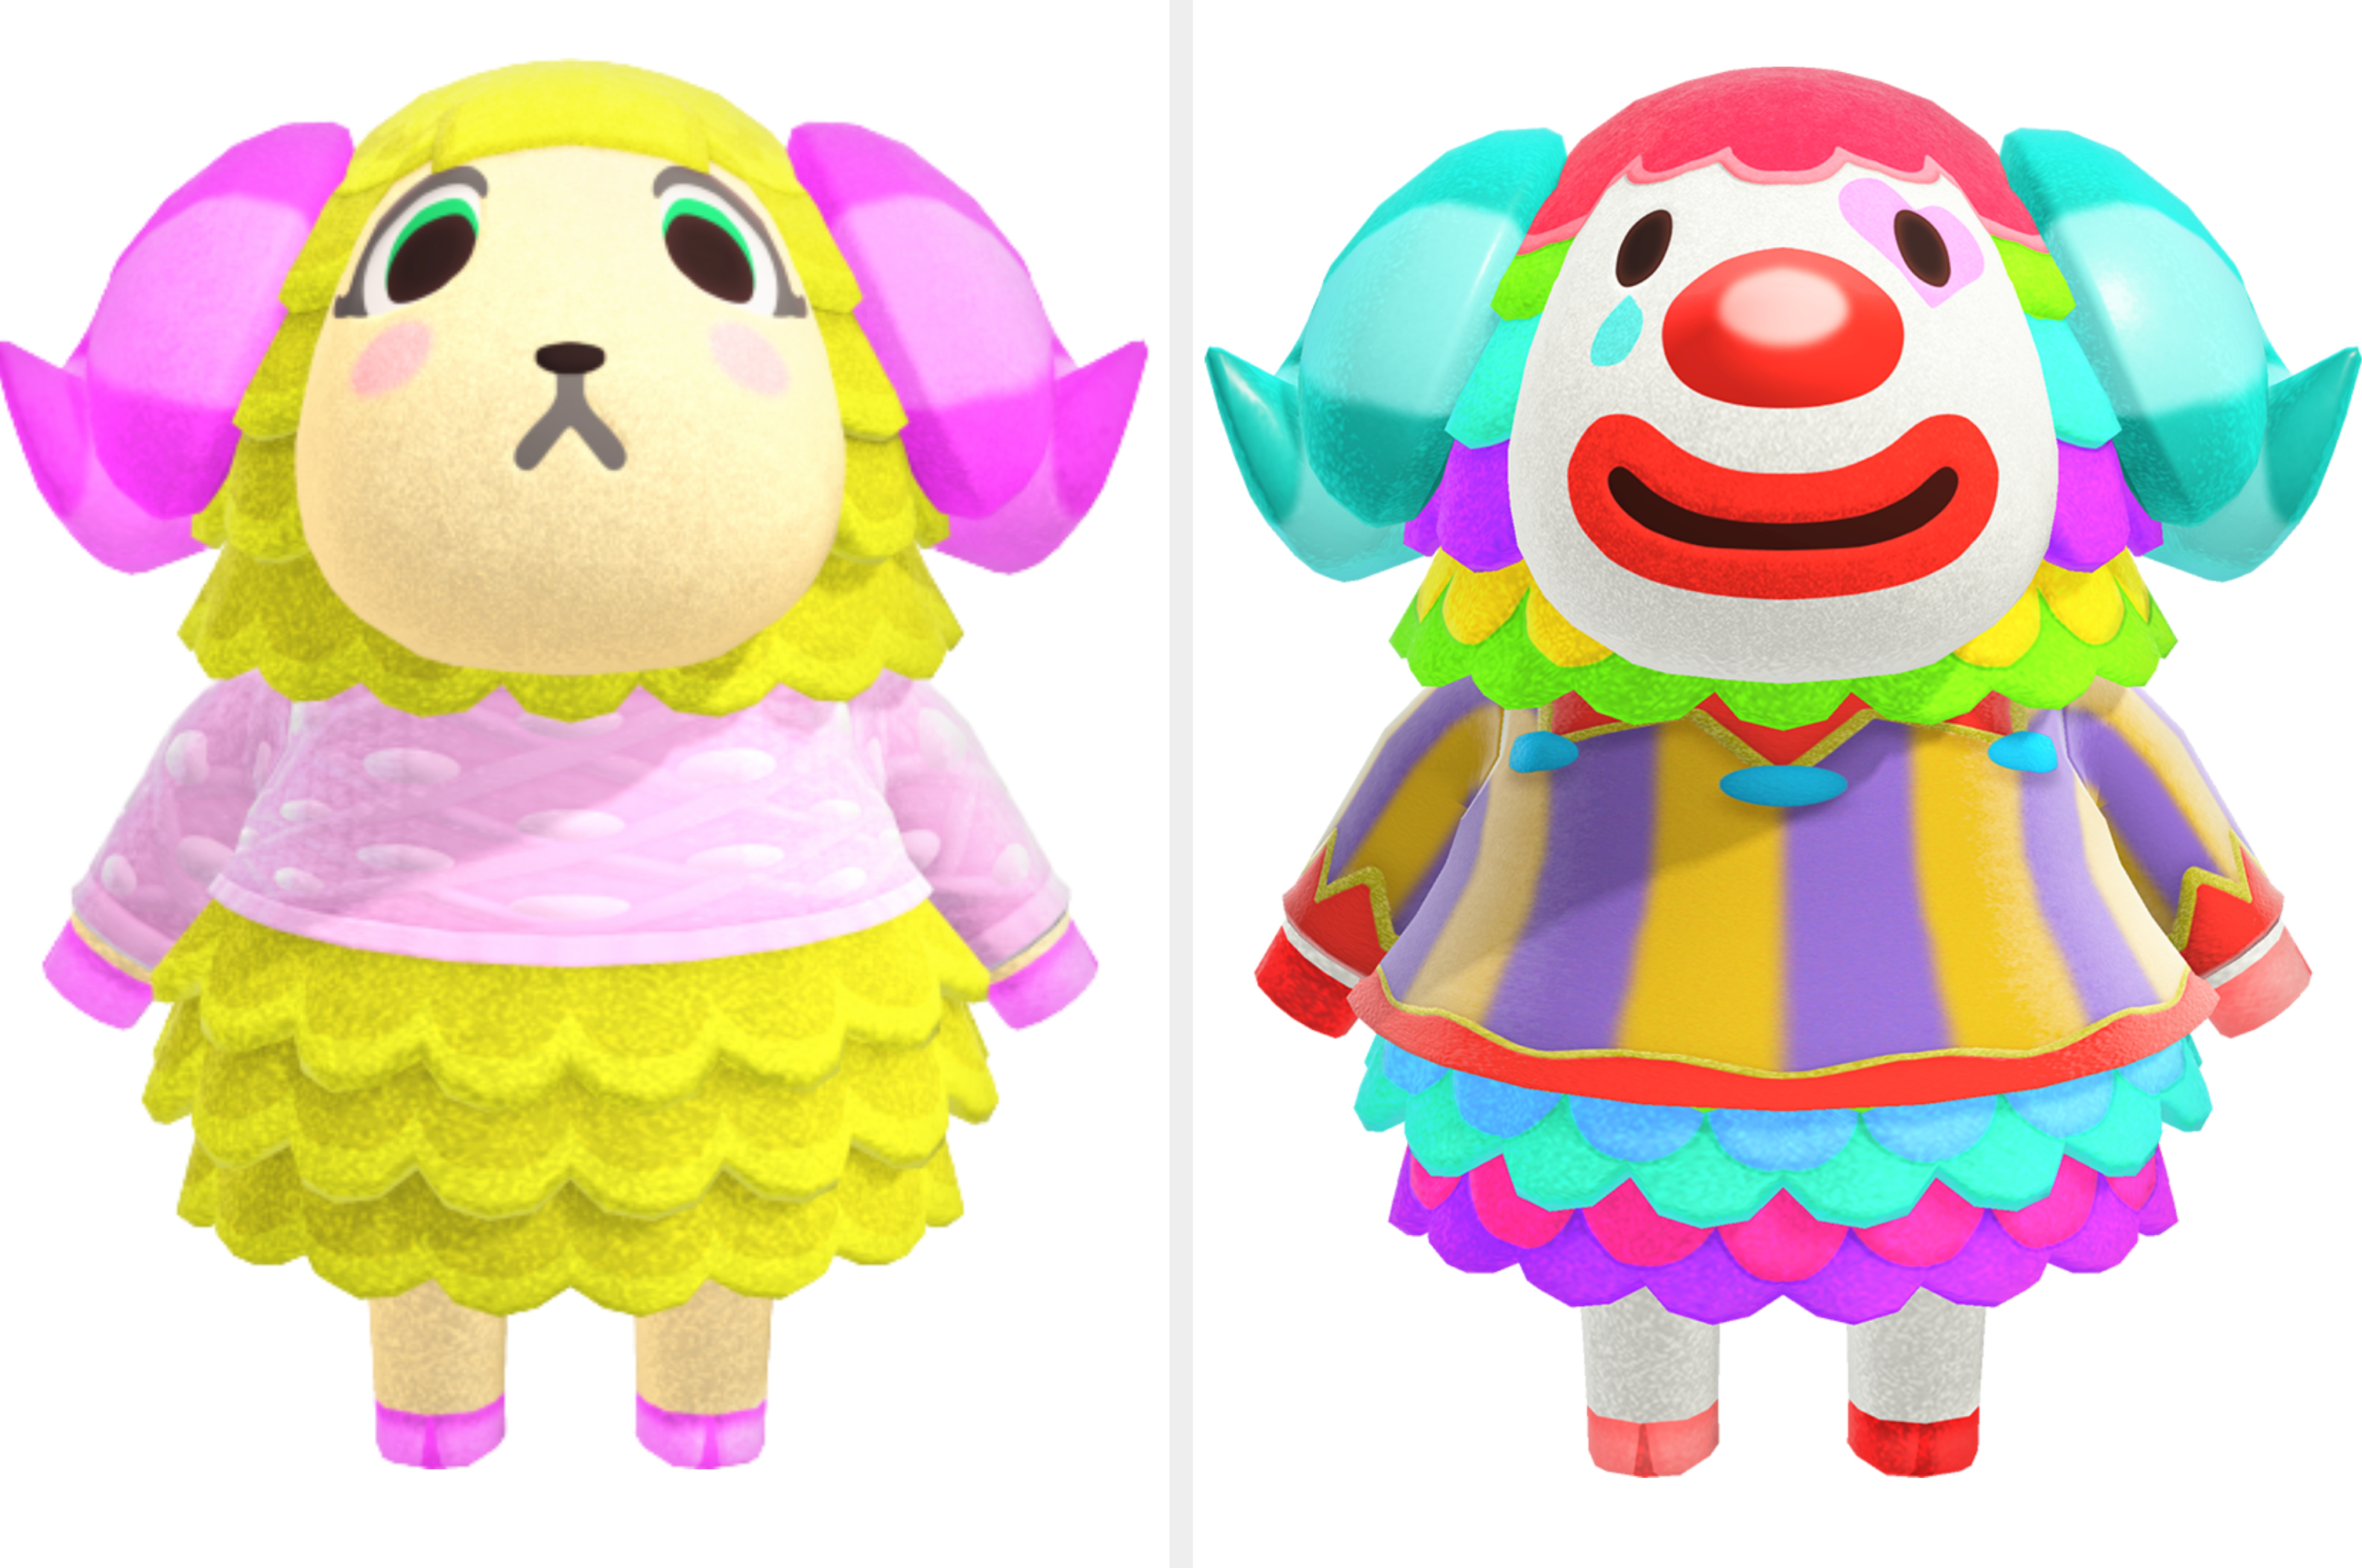 Which Animal Crossing Sheep Are You?